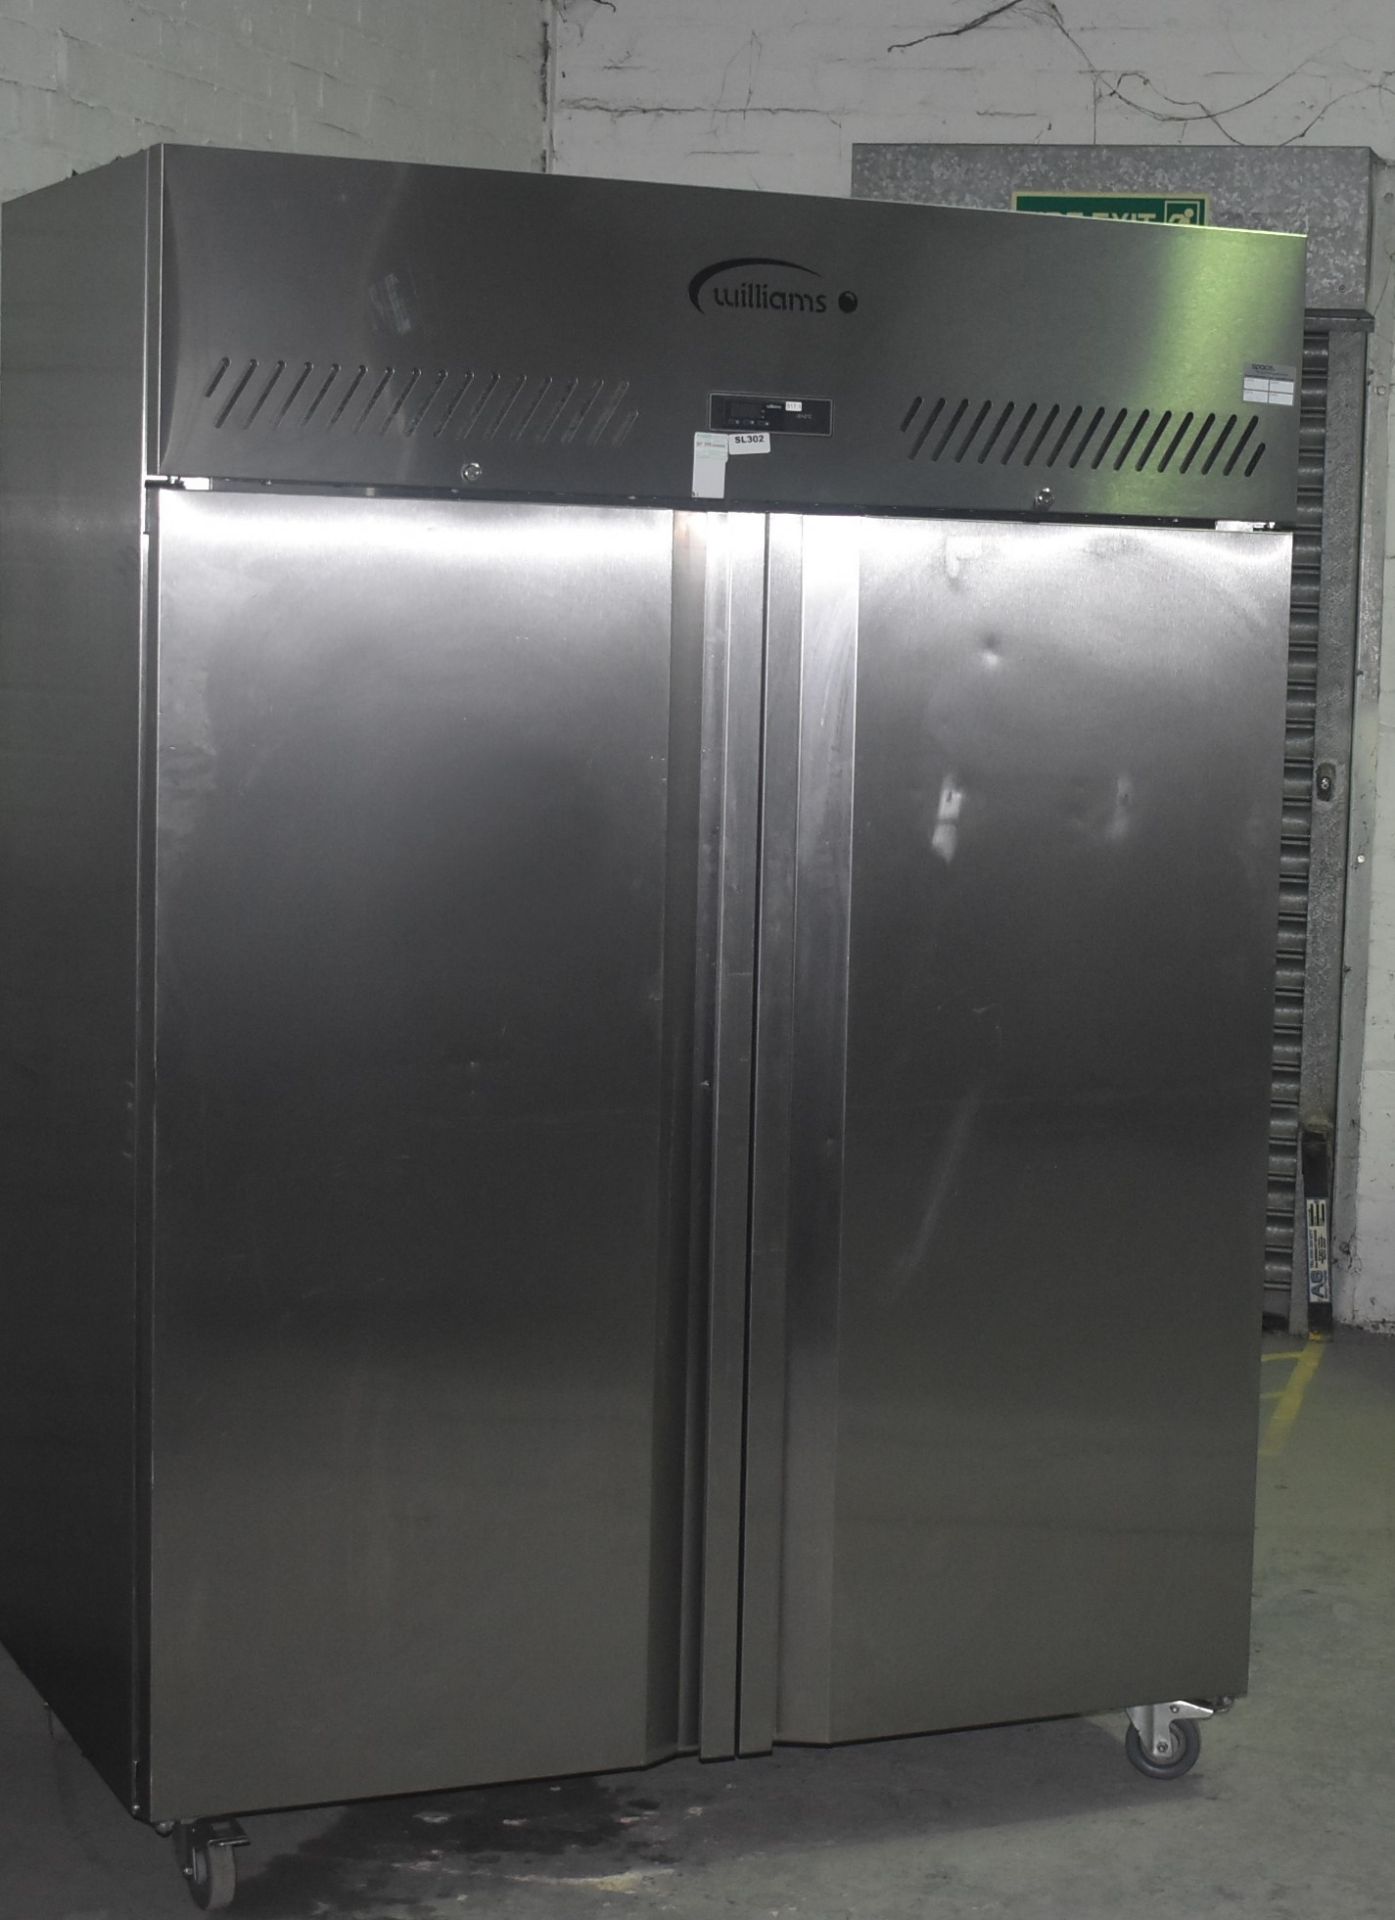 1 x Williams Double Door Upright Refrigerator - Model MJ2SA - Recently Removed From Major - Image 7 of 7